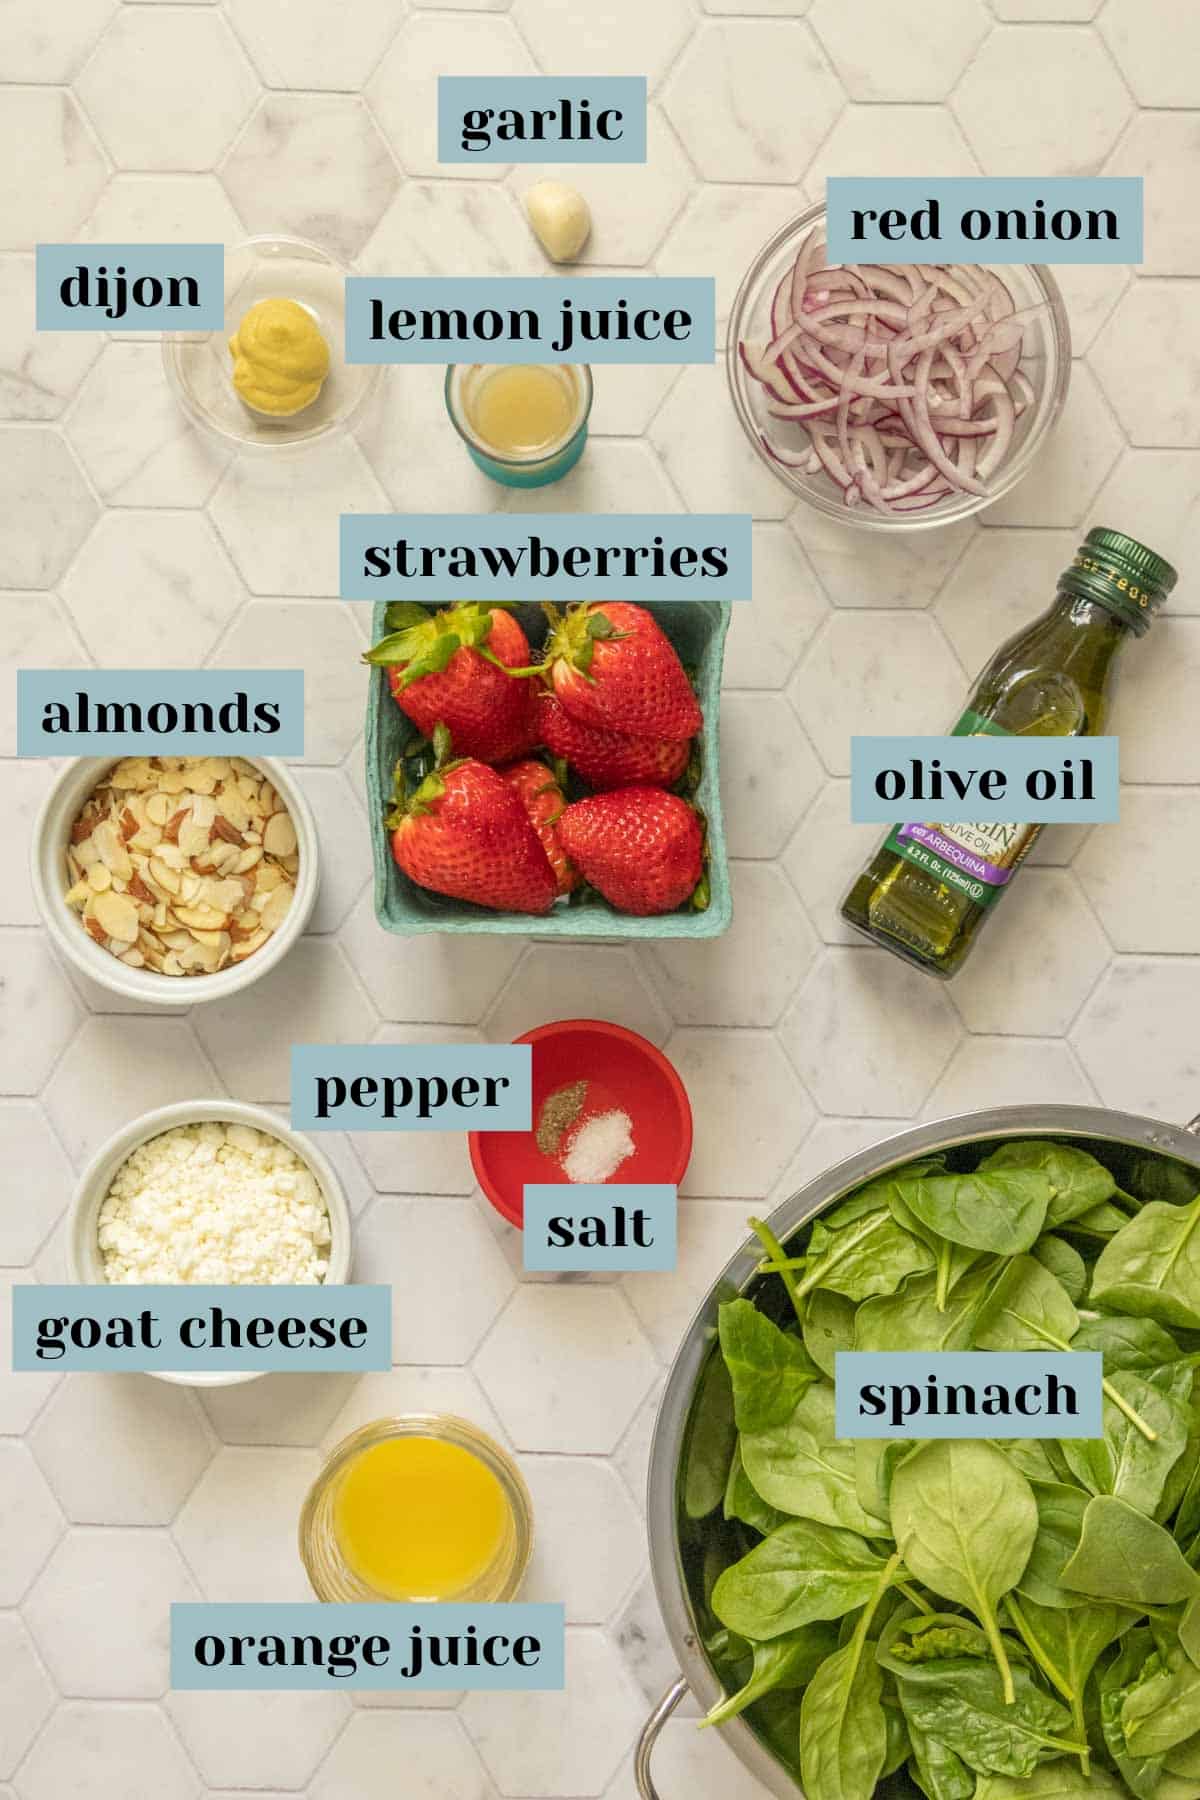 Ingredients for strawberry spinach salad on a tile surface with labels.